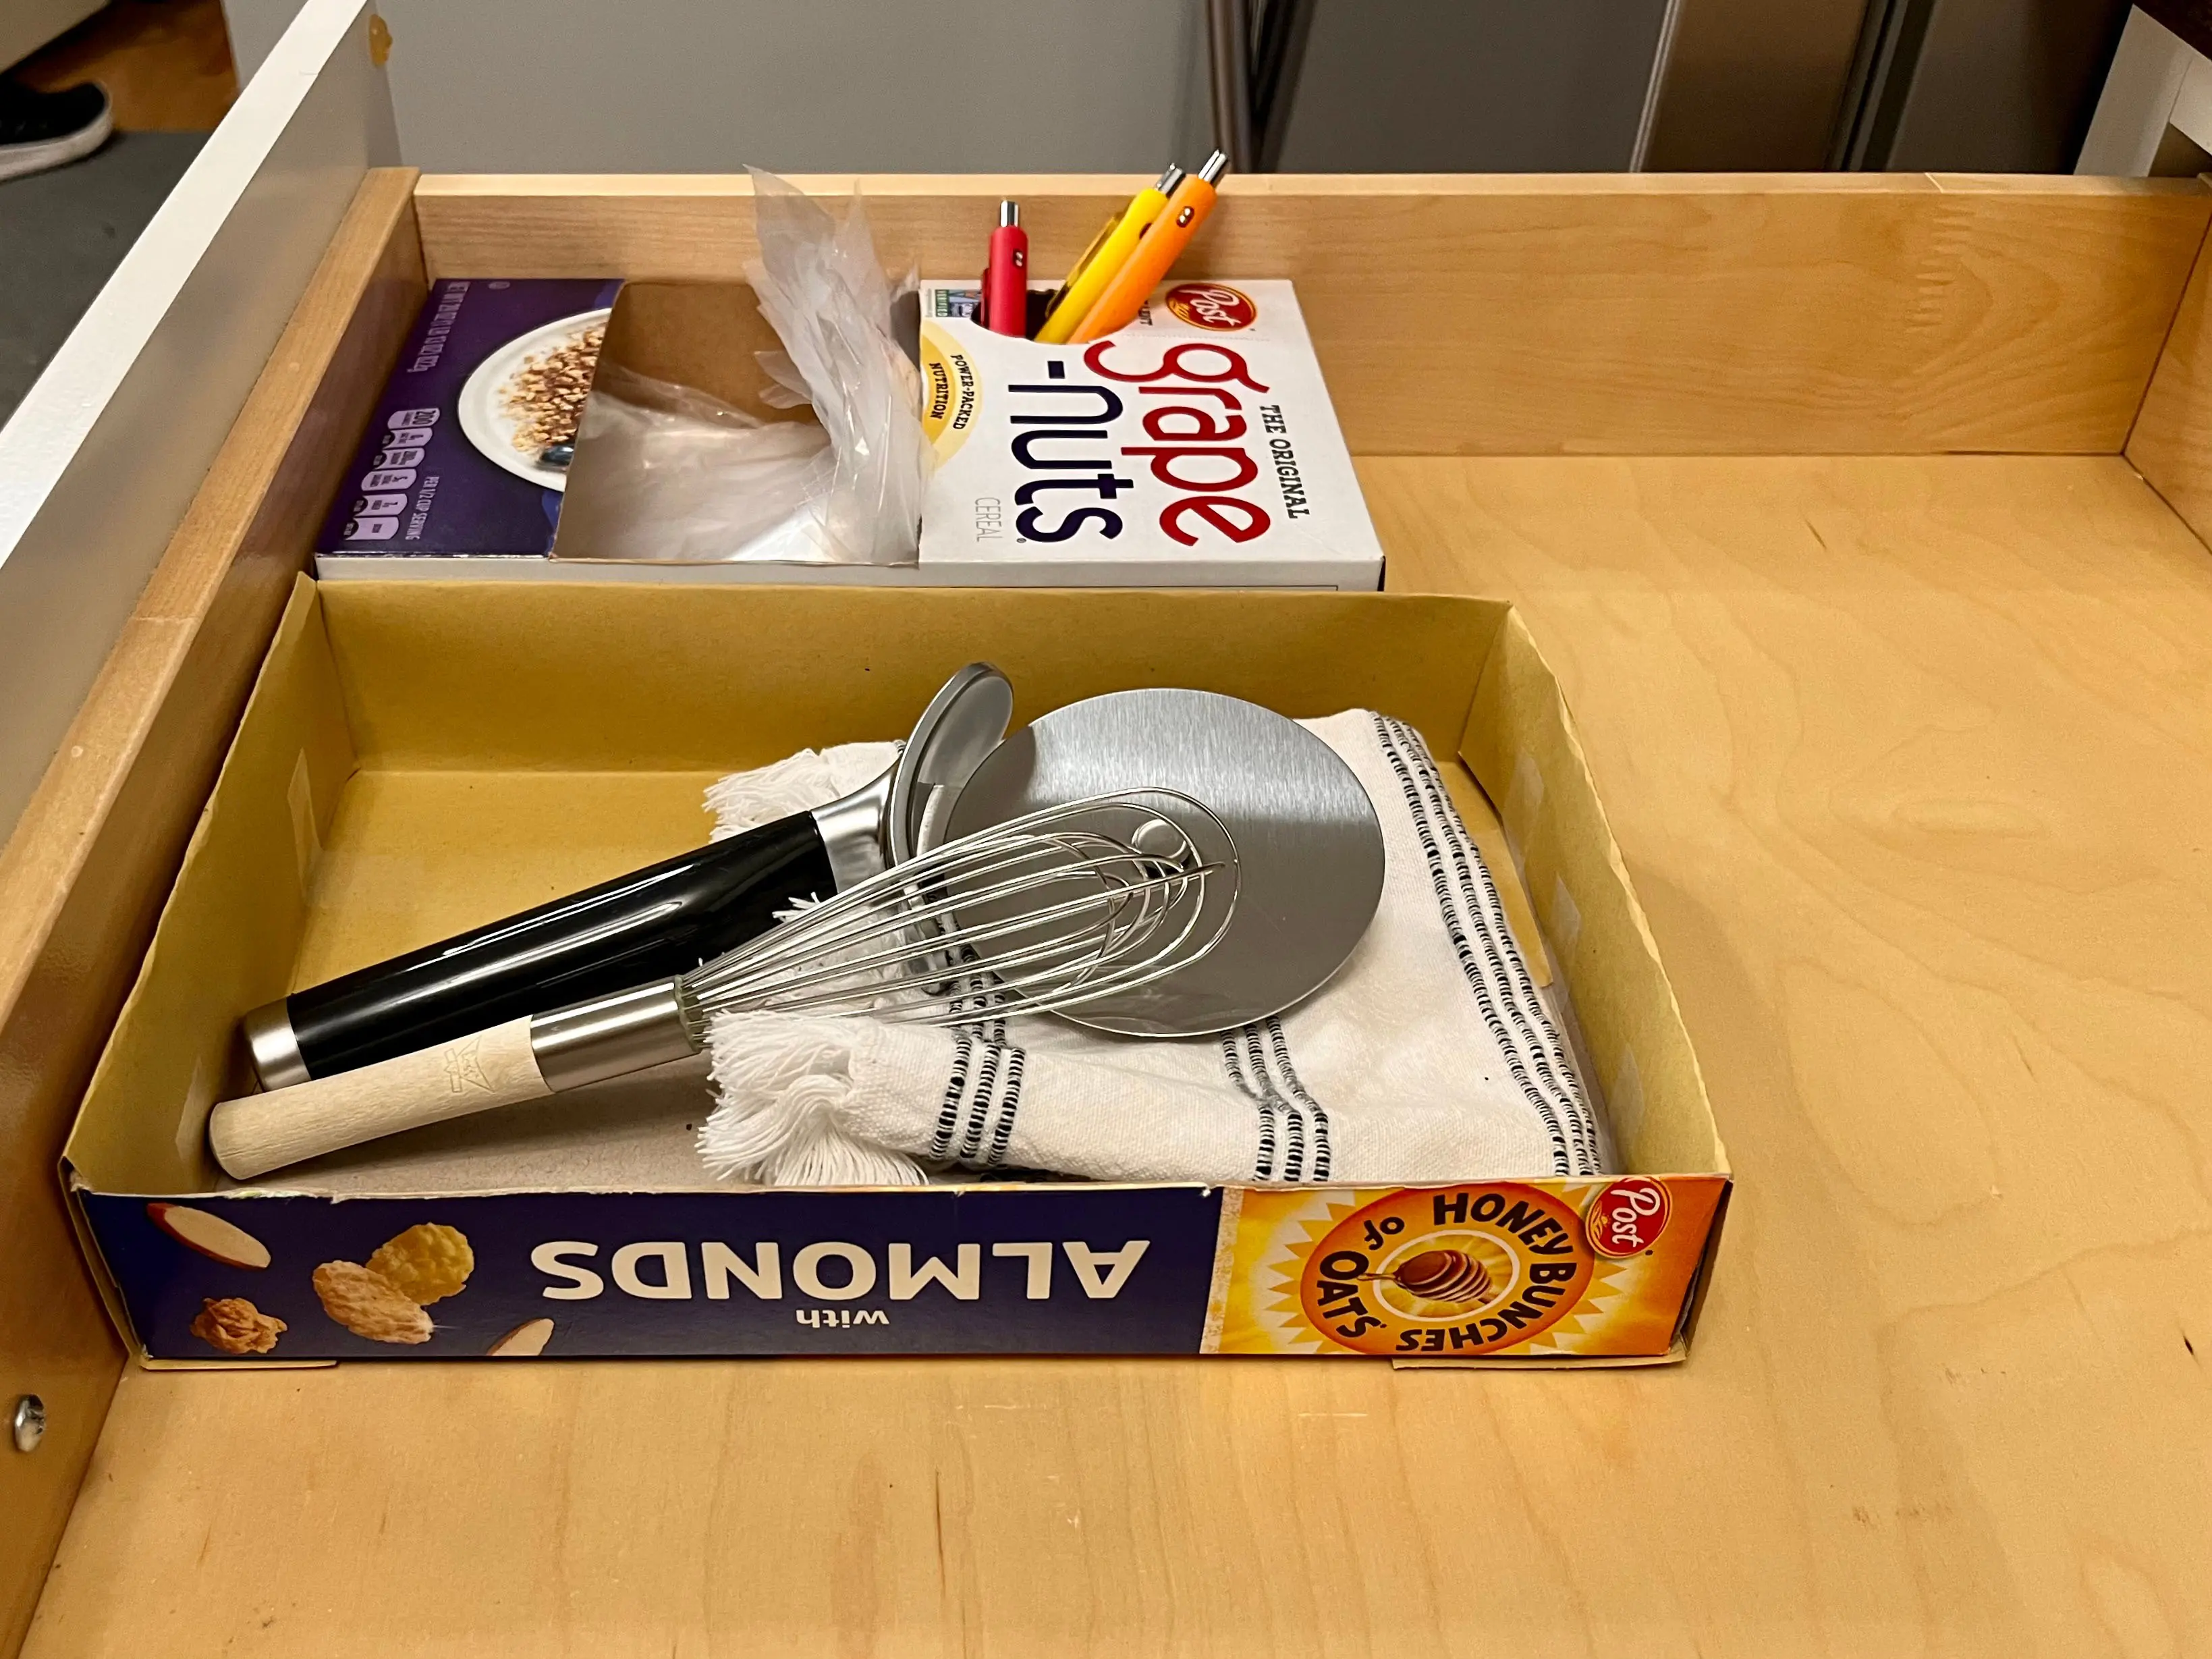 A box of Honey Bunches of Oats with Almonds that is cut in half and sitting in a drawer.